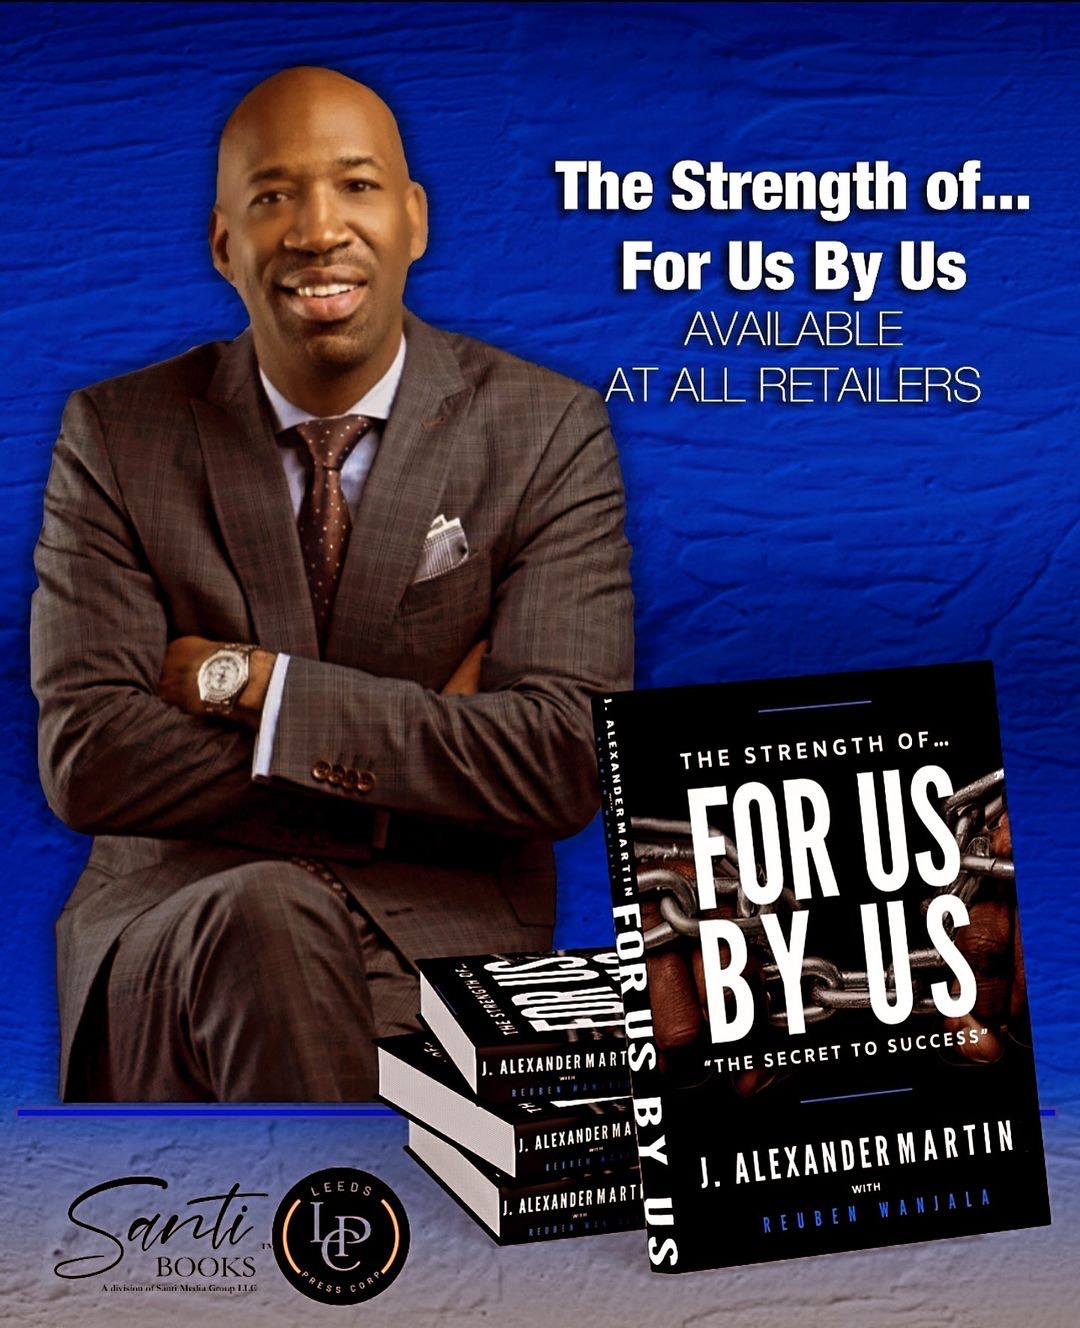 Dr. J. Alexander Martin Unveils the Empowering Secret within "For Us By Us" Communities in His Third Masterpiece Book